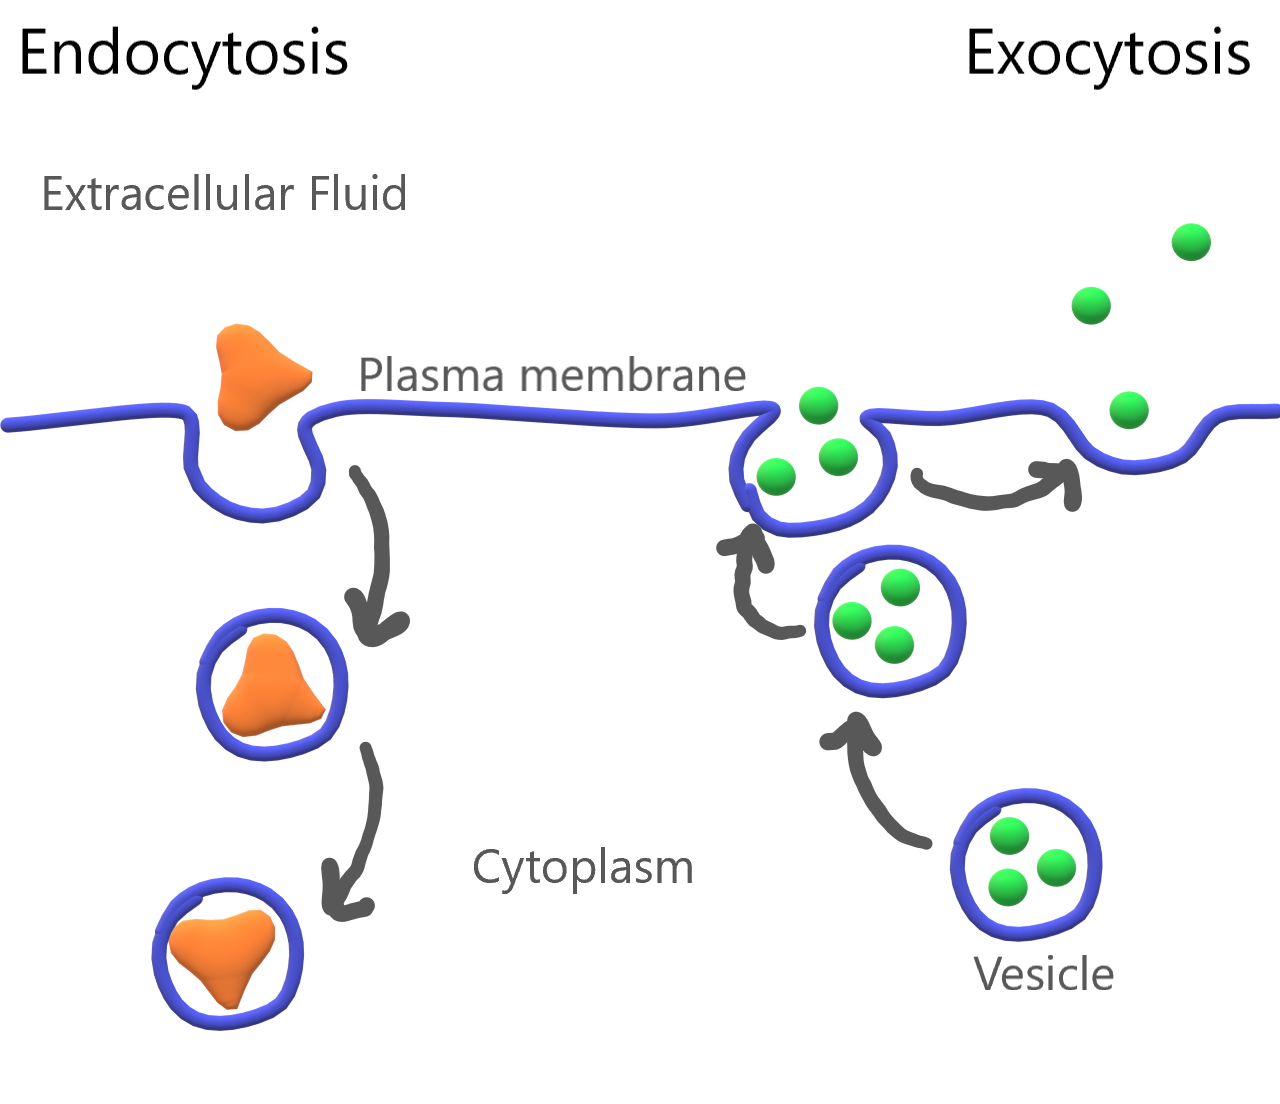 Image shows a diagram of both endocytosis and exocytosis. On the left side of the diagram, and large particle is being brought into the cell by creating a pocket of plasma membrane around the particle. This pocket deepens and eventually pinches off from the rest of the membrane, forming a vesicle containing the particle. This process is called endocytosis. On the right side of the diagram, a vesicle containing substances for export out of the cell are contained in a vesicle. The vesicle travels to the cell membrane and the vesicular membrane fuses with the cell membrane, releasing the contents of the vesicle outside of the cell.